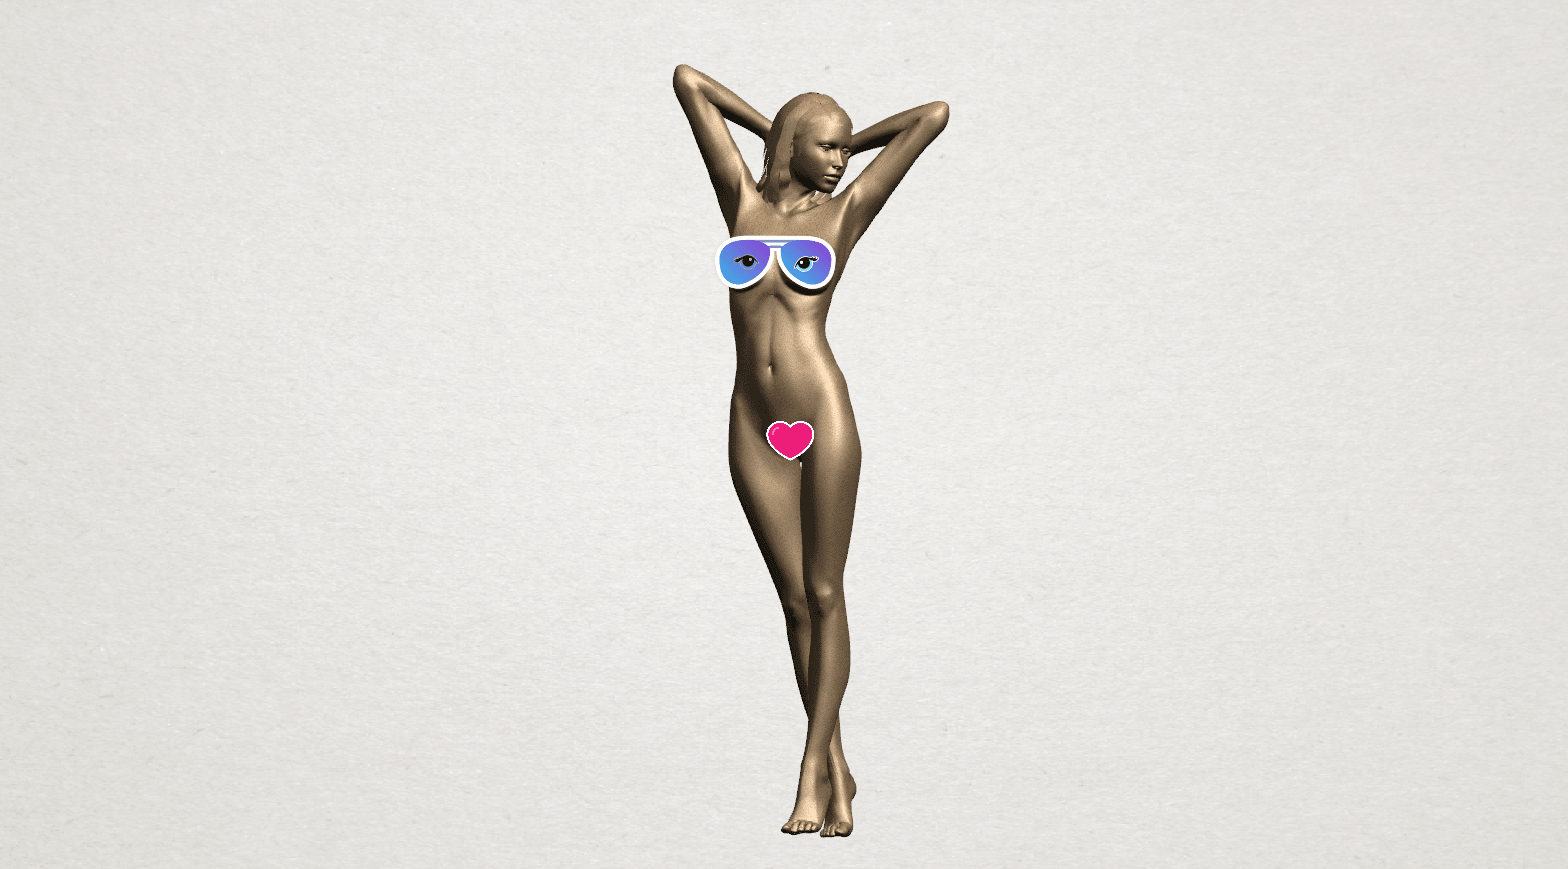 Naked Girl - Full Body (i) A00.png Download free file Naked Girl - Full Body 01 • 3D printing template, GeorgesNikkei